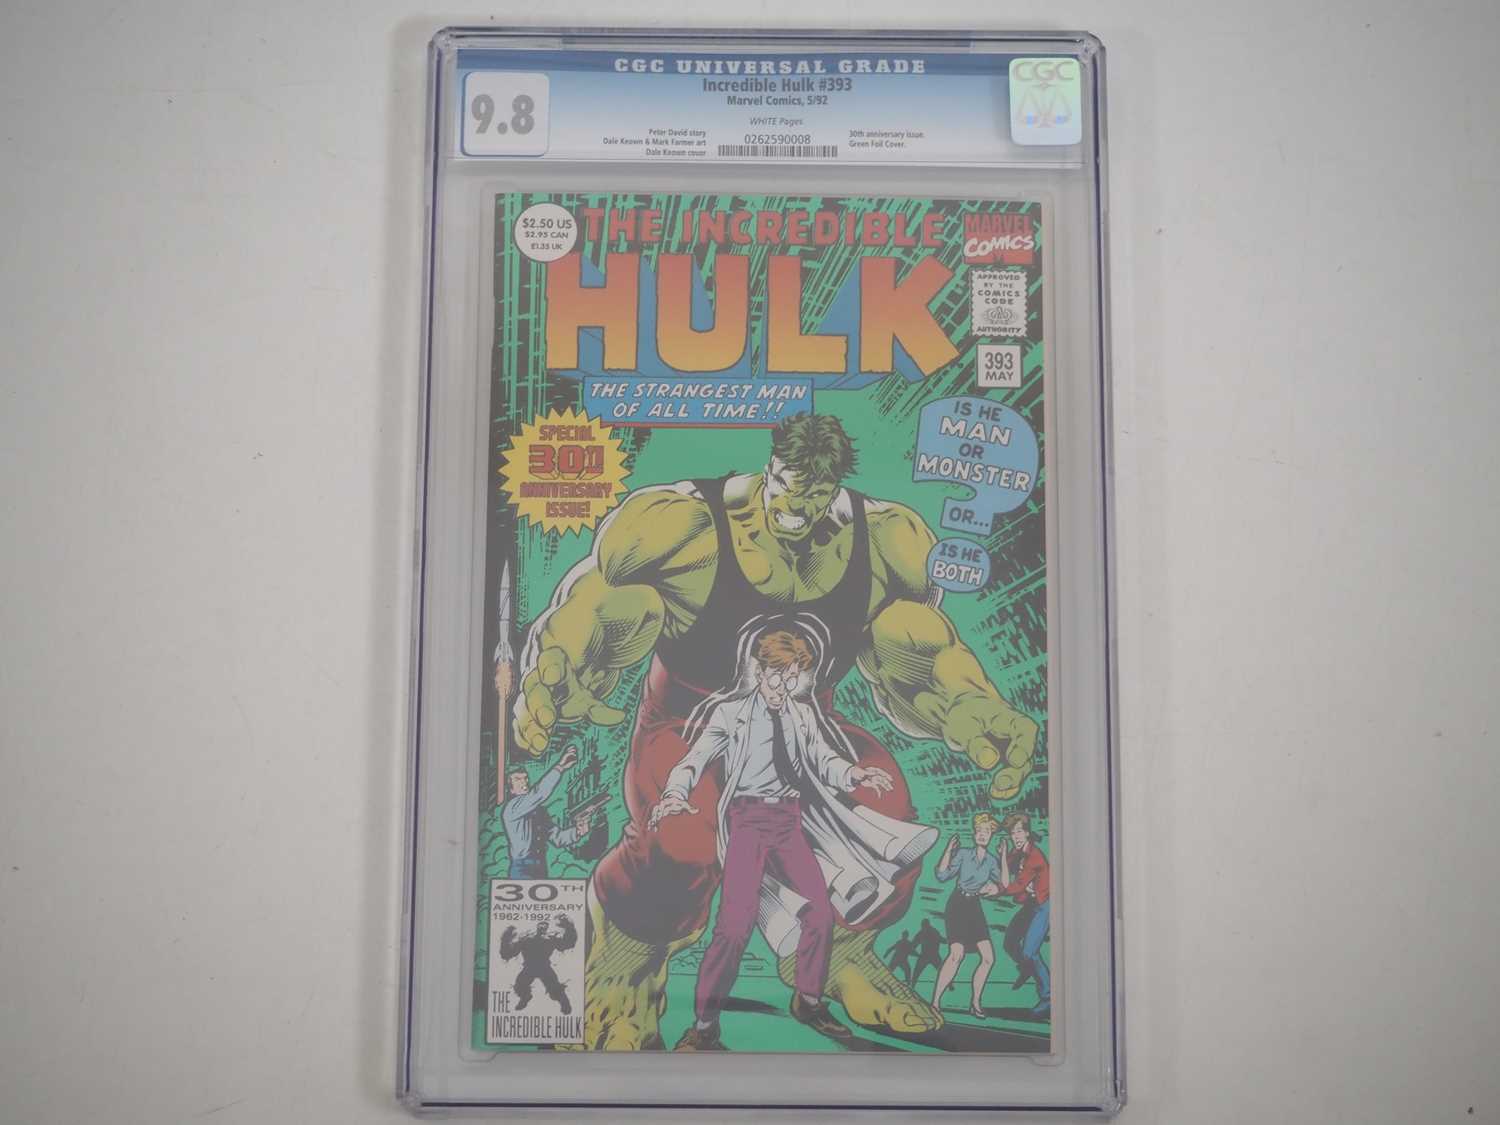 INCREDIBLE HULK #393 (1992 - MARVEL) - GRADED 9.8(NM/MINT) by CGC - 30th anniversary issue with